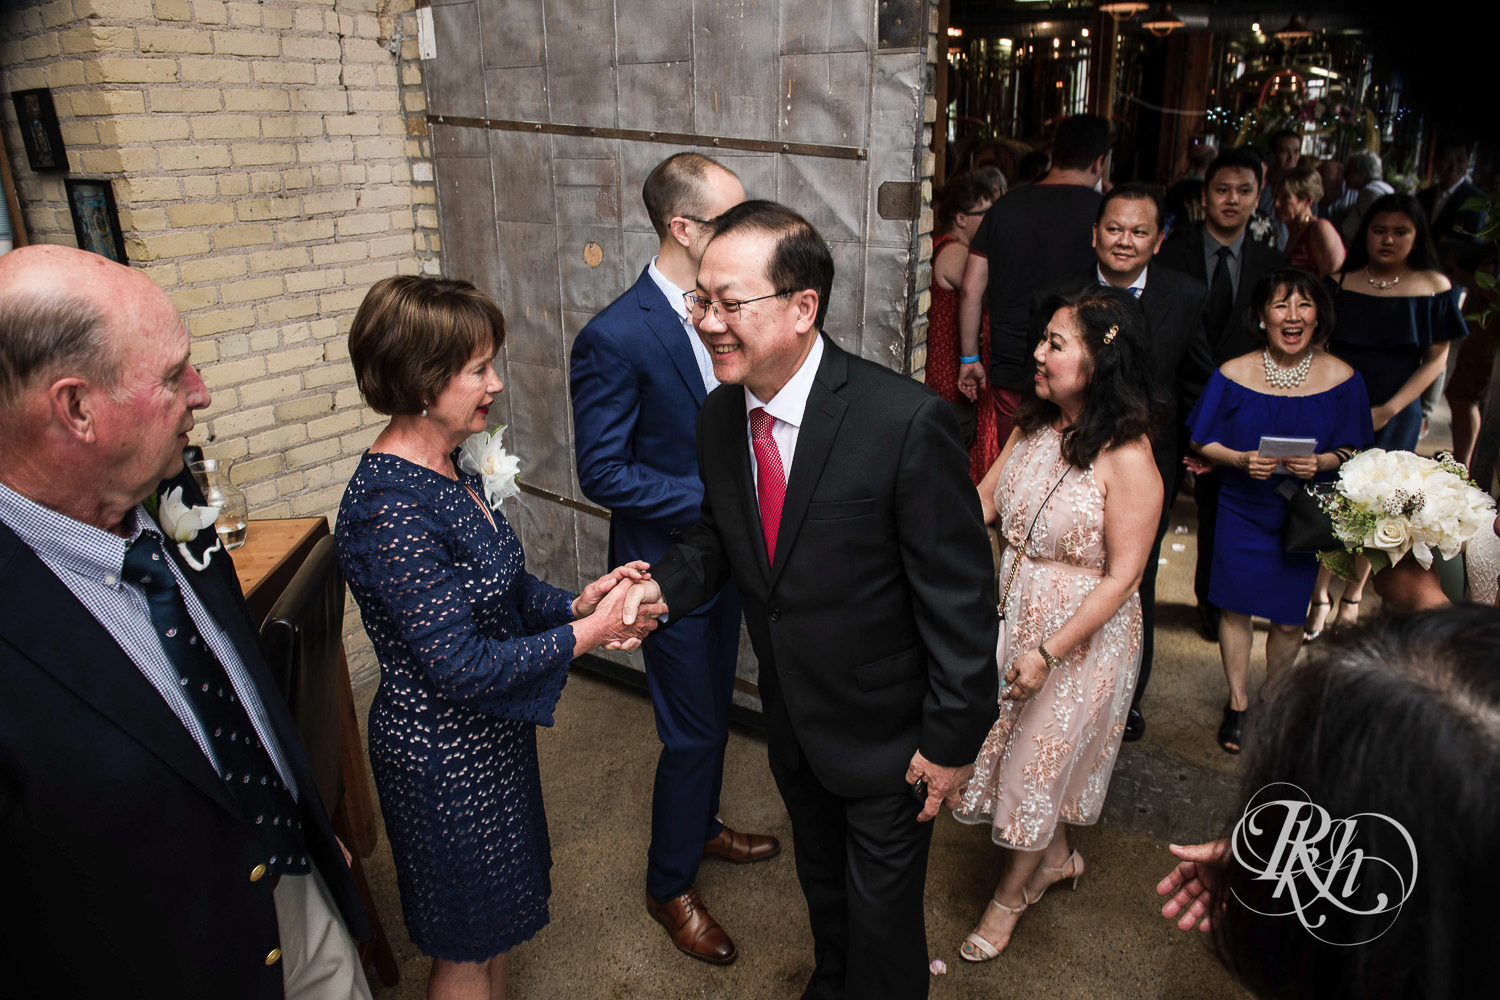 Asian bride with glasses and groom meet with guests during receiving line at 612 Brew in Minneapolis, Minnesota.